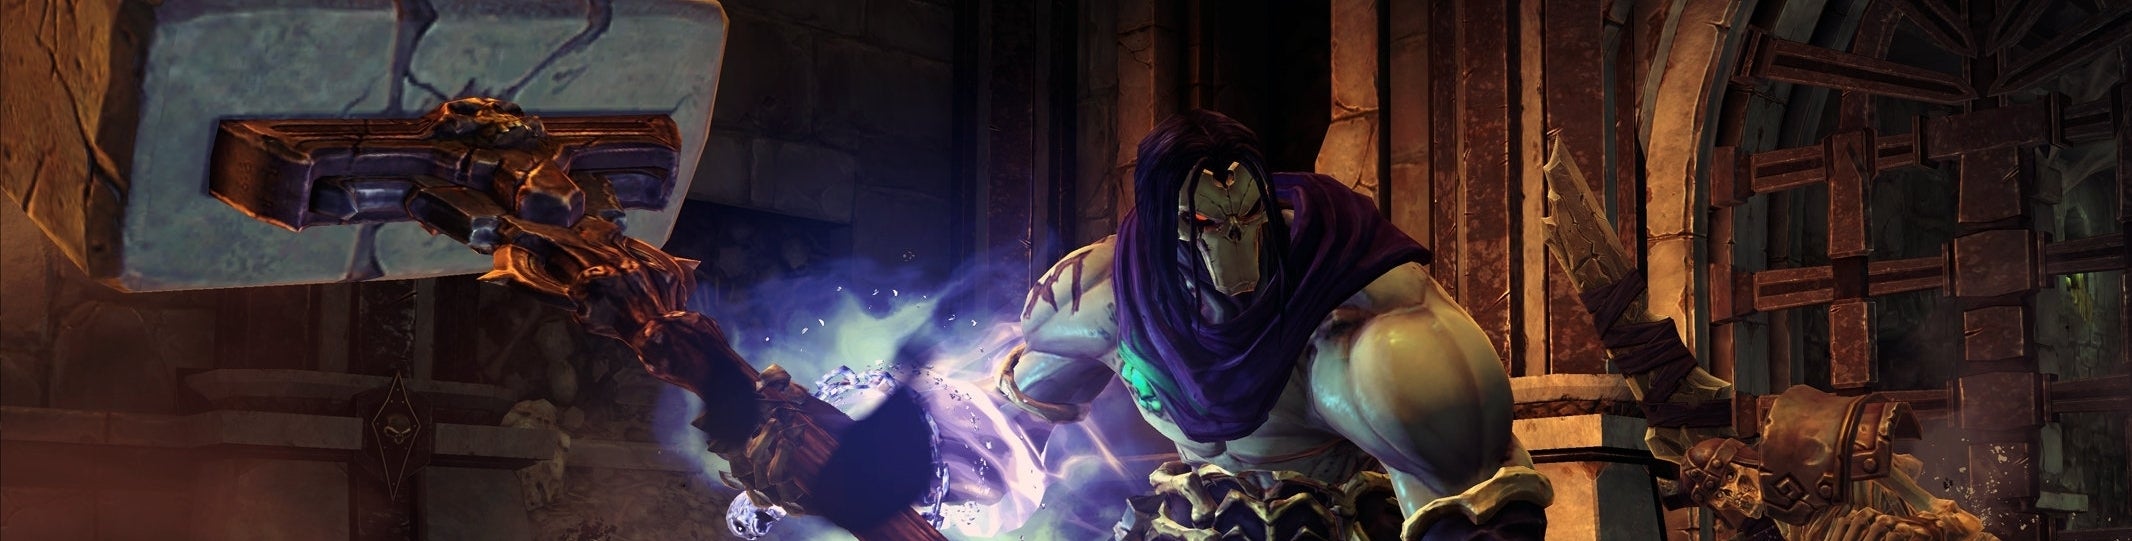 Image for Face-Off: Darksiders 2 on Wii U